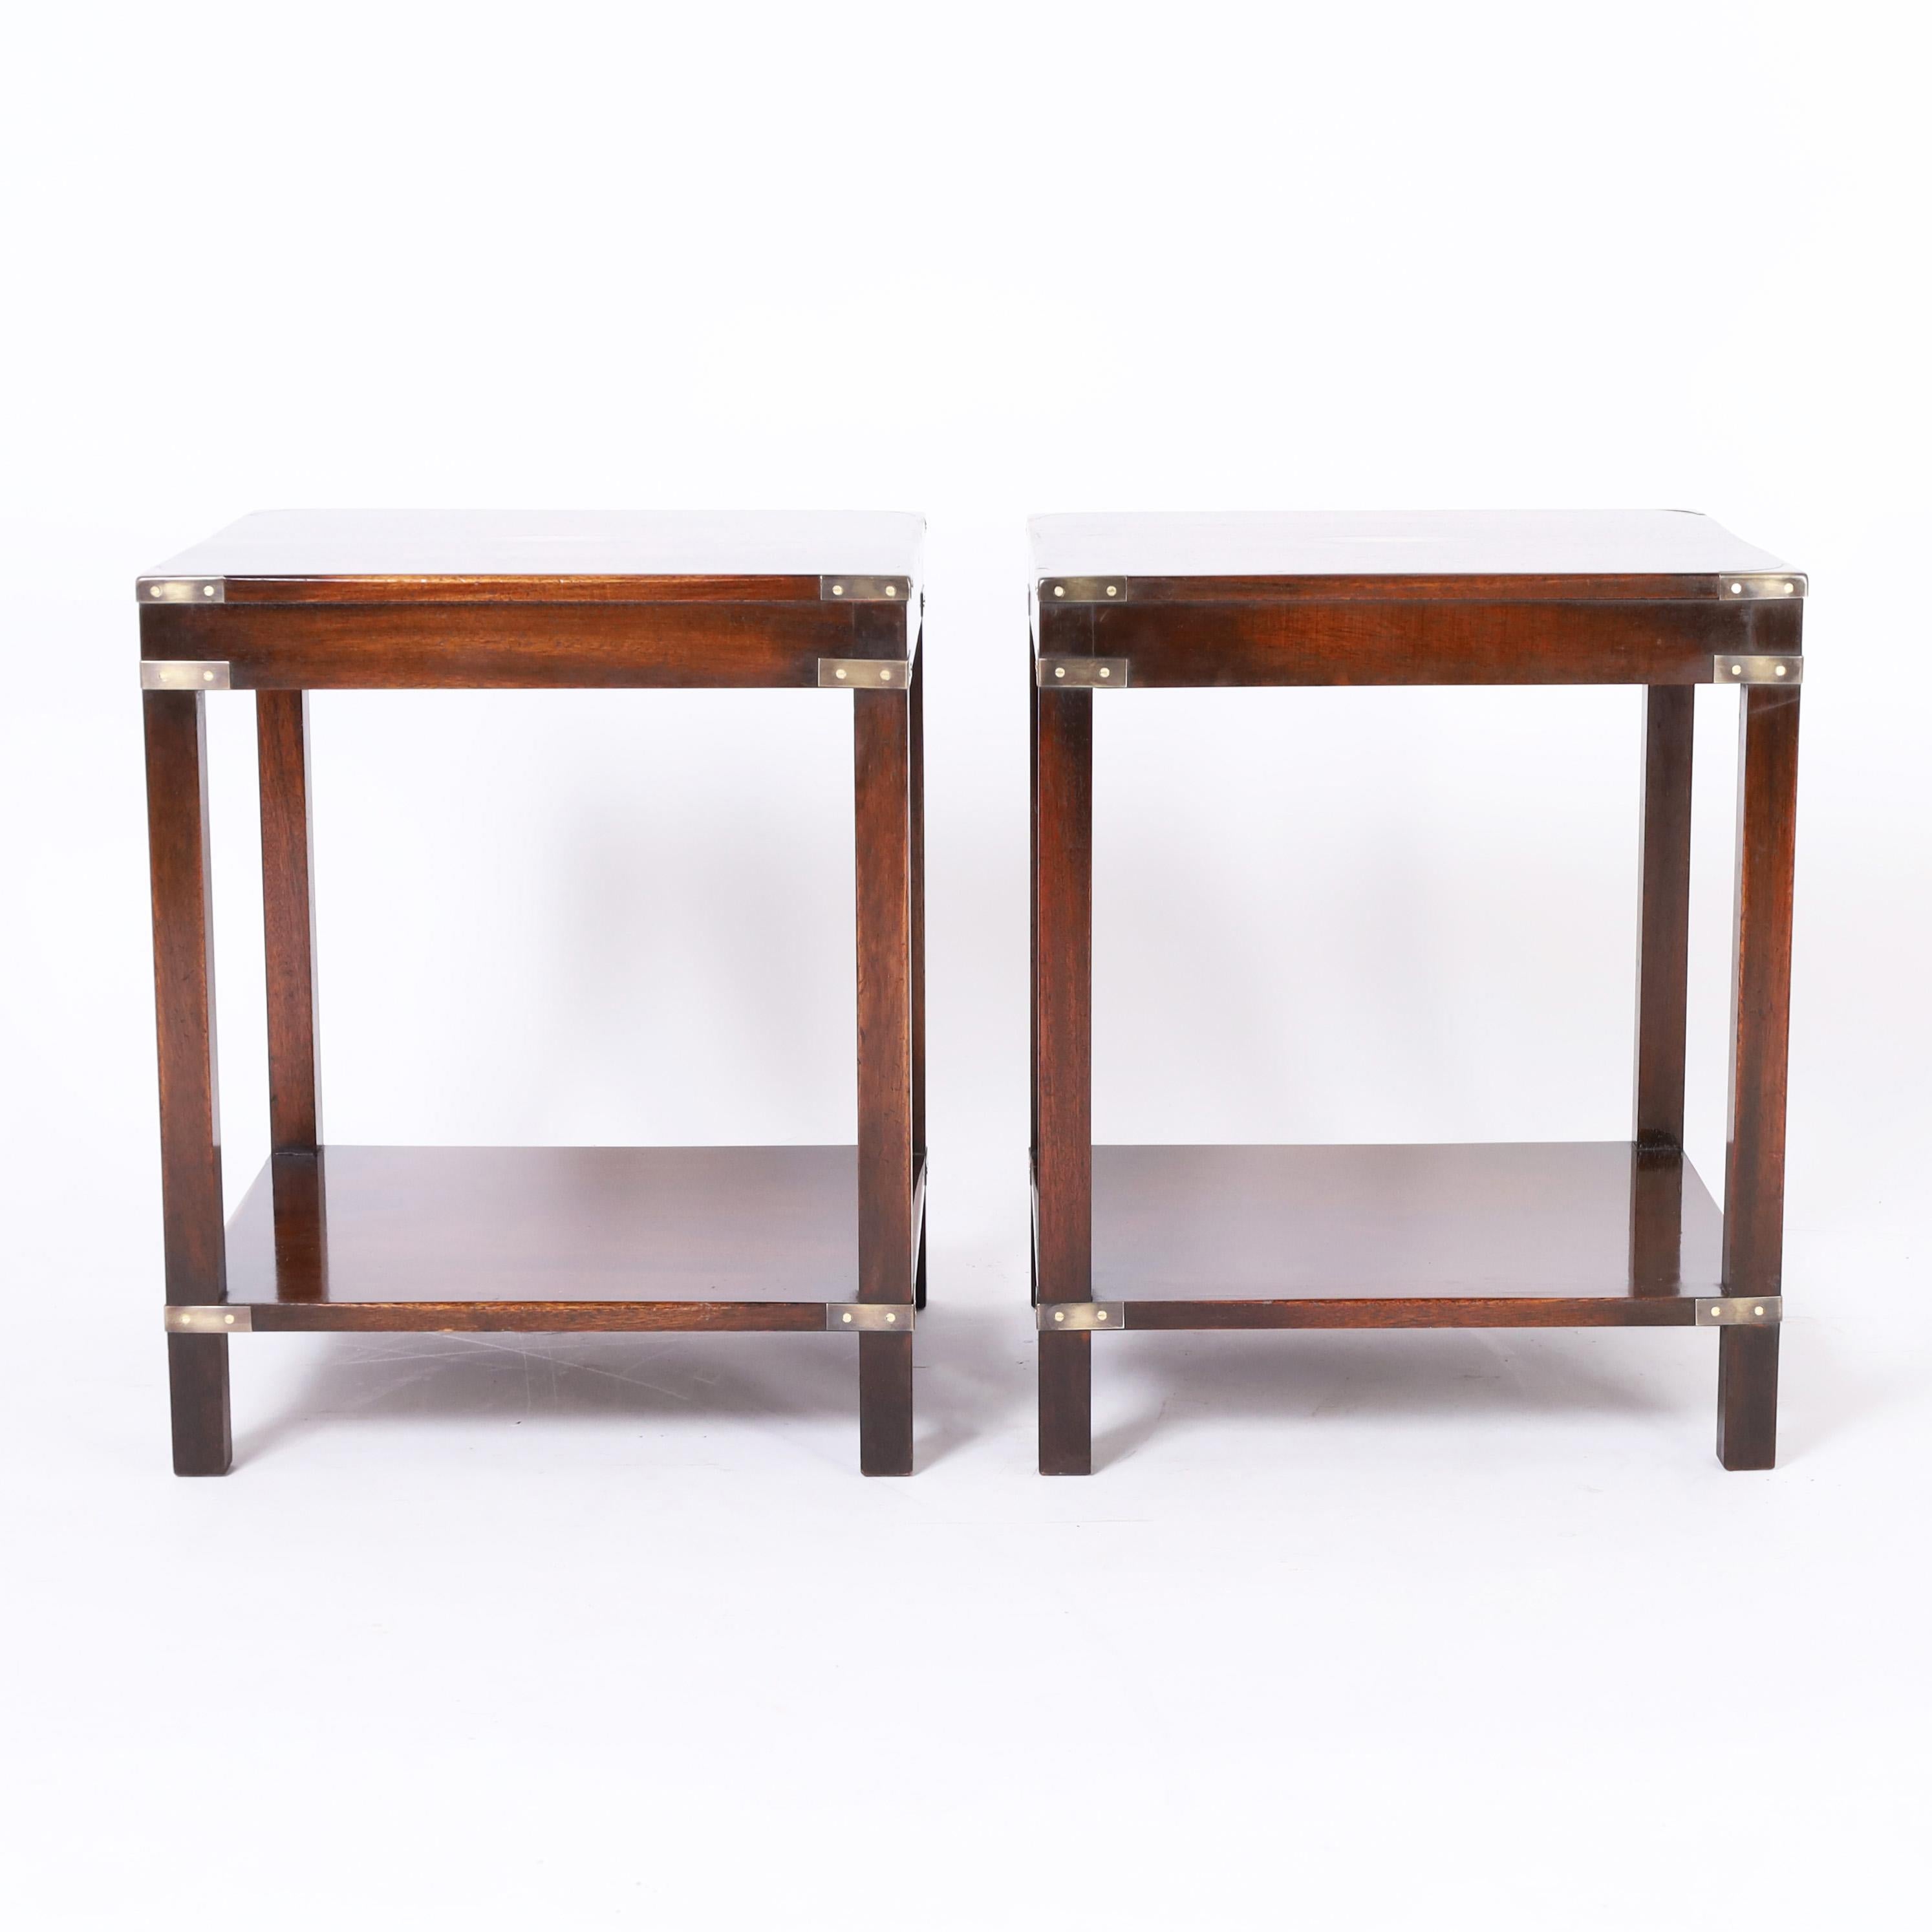 Handsome pair of British colonial style stands crafted in mahogany with two tiers in a stylized parsons form with campaign style brass hardware.